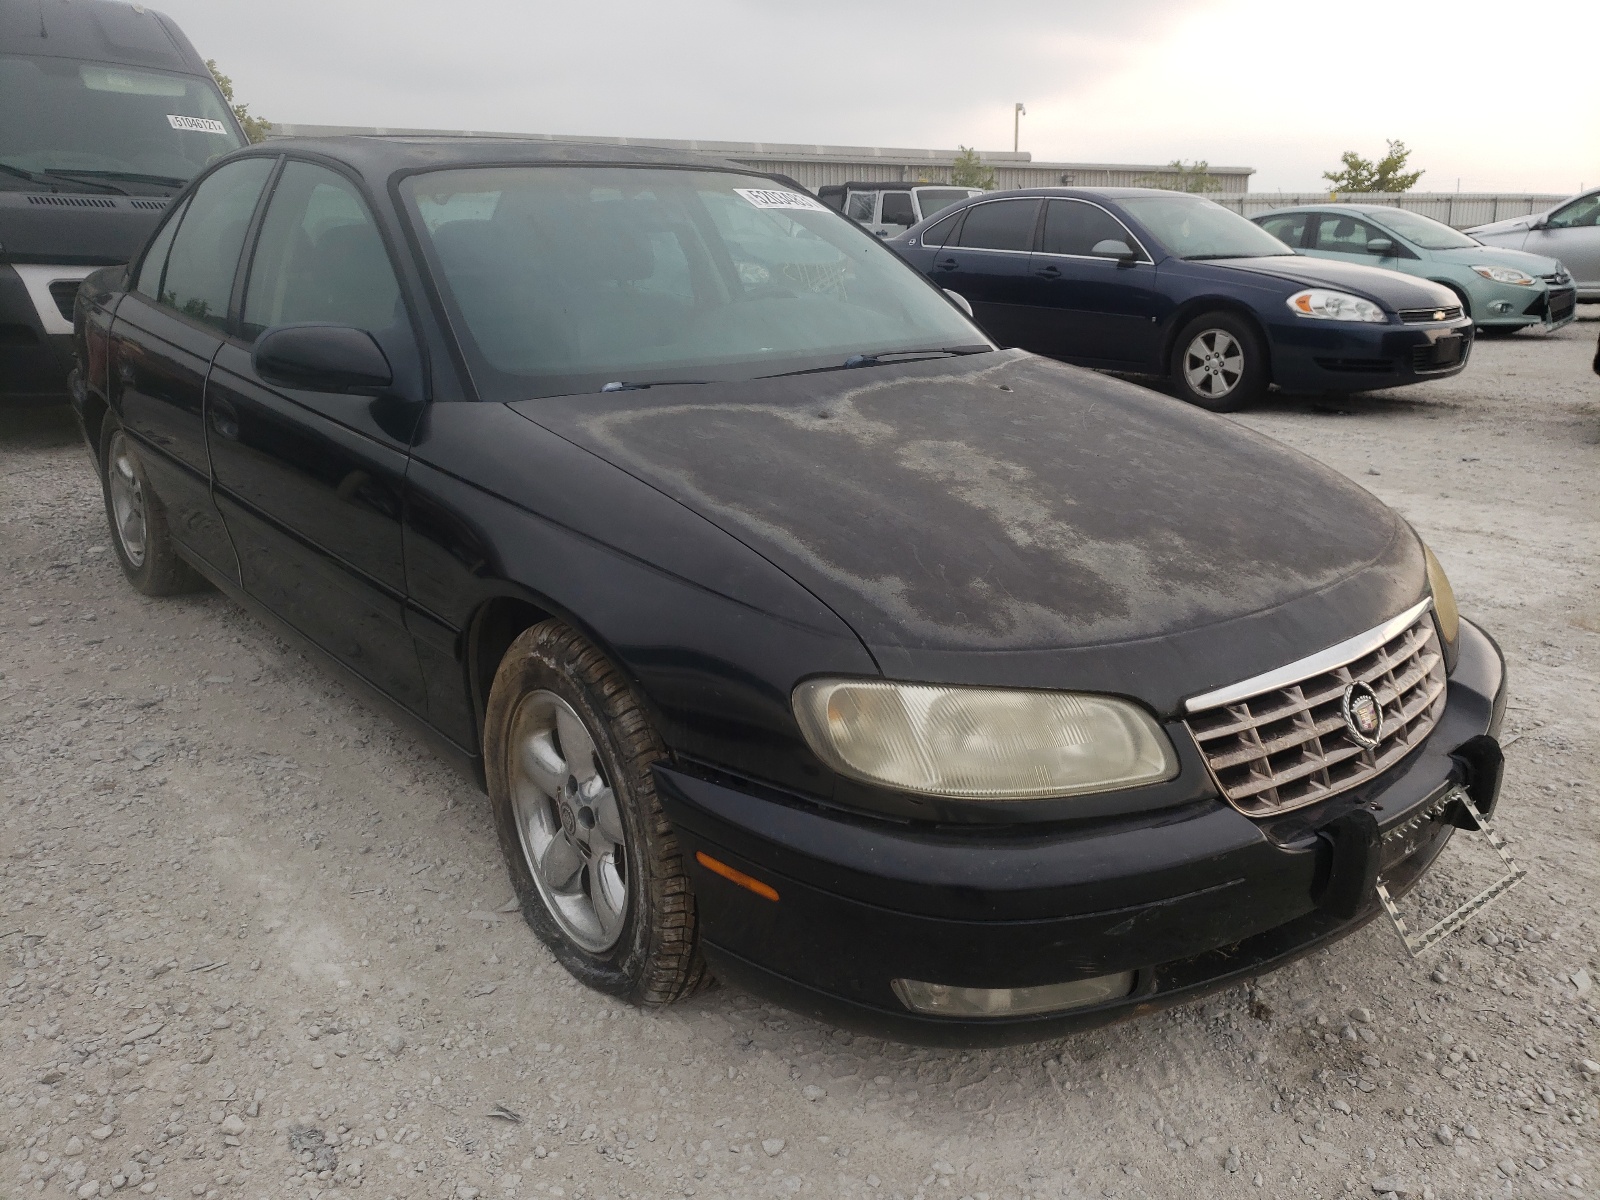 CADILLAC CATERA 1998, W06VR52R5WR179680 — Auto Auction Spot